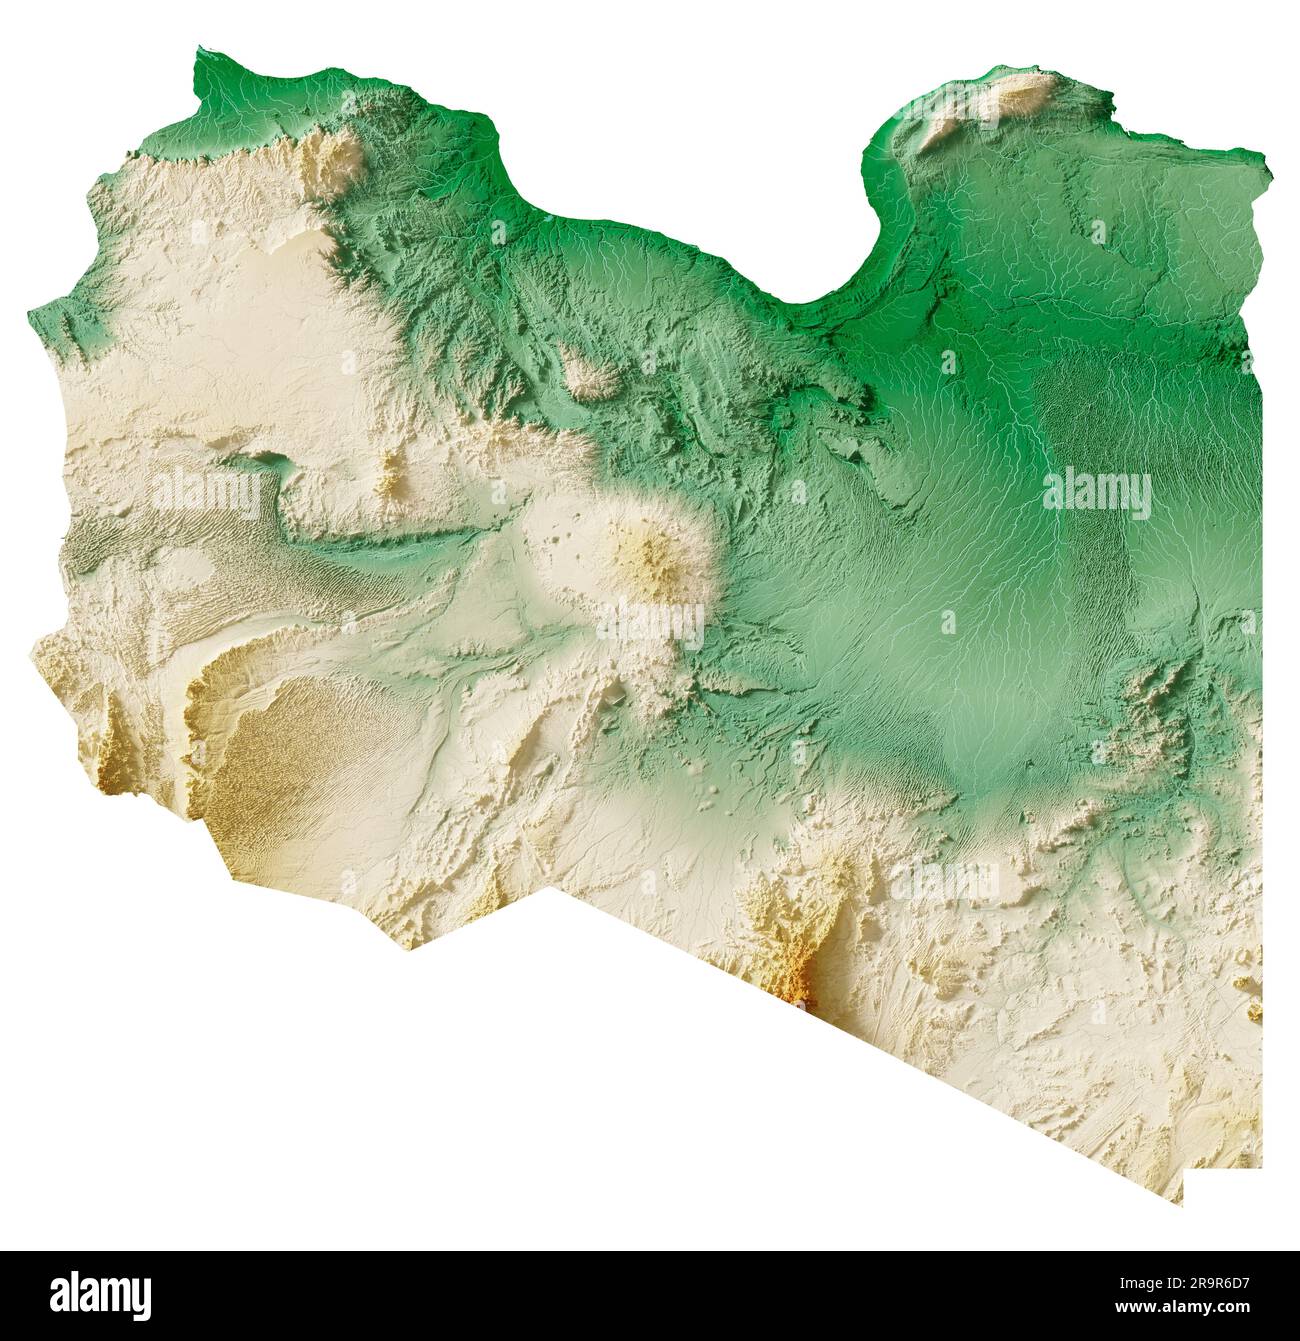 Libya. Highly detailed 3D rendering of shaded relief map with rivers and lakes. Colored by elevation. Pure white background. Satellite data. Stock Photo